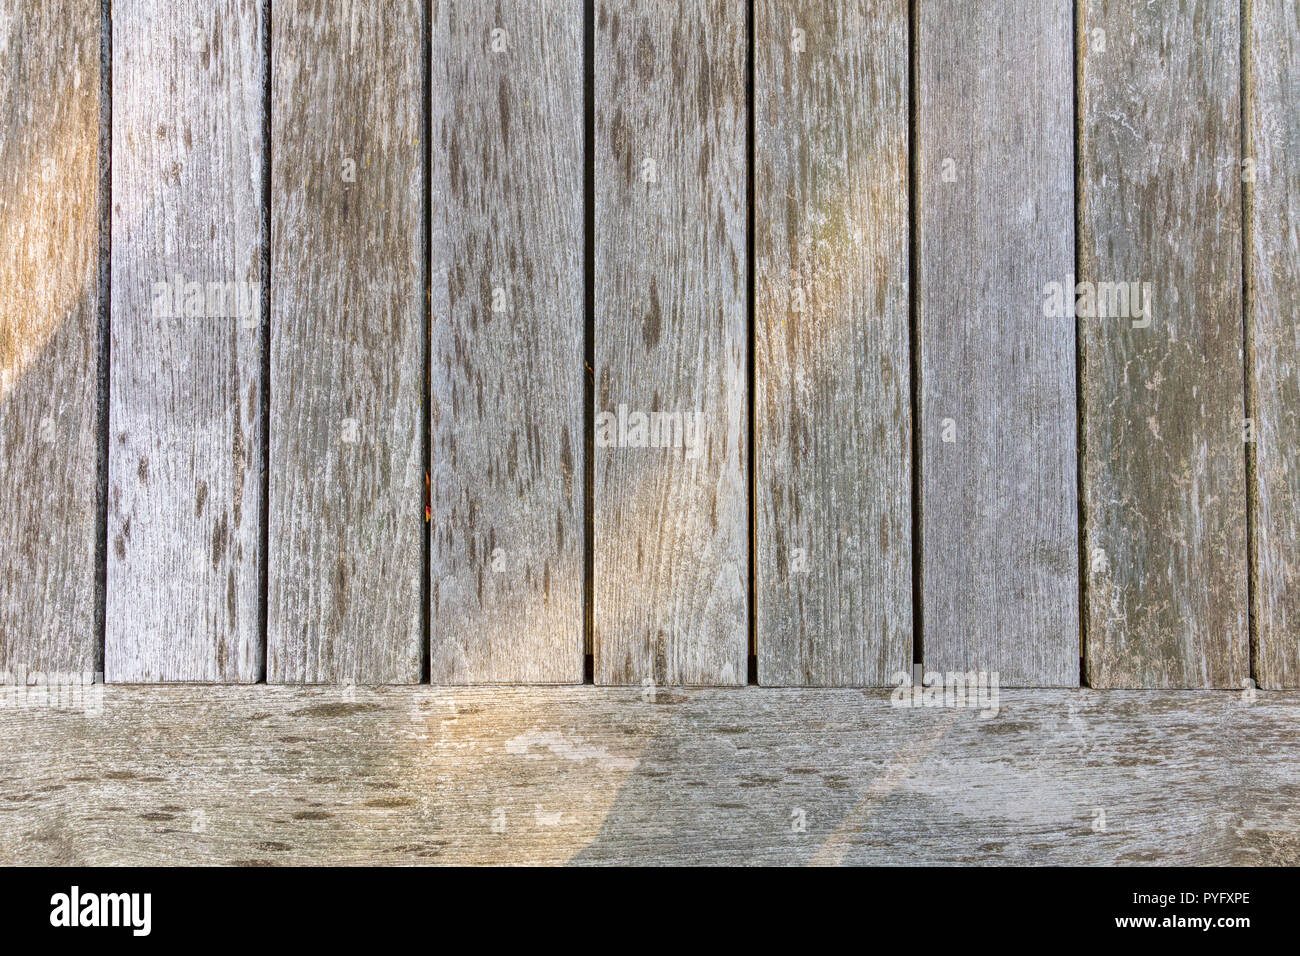 Wooden vertical planks background, texture. Wooden floor or wall Stock Photo